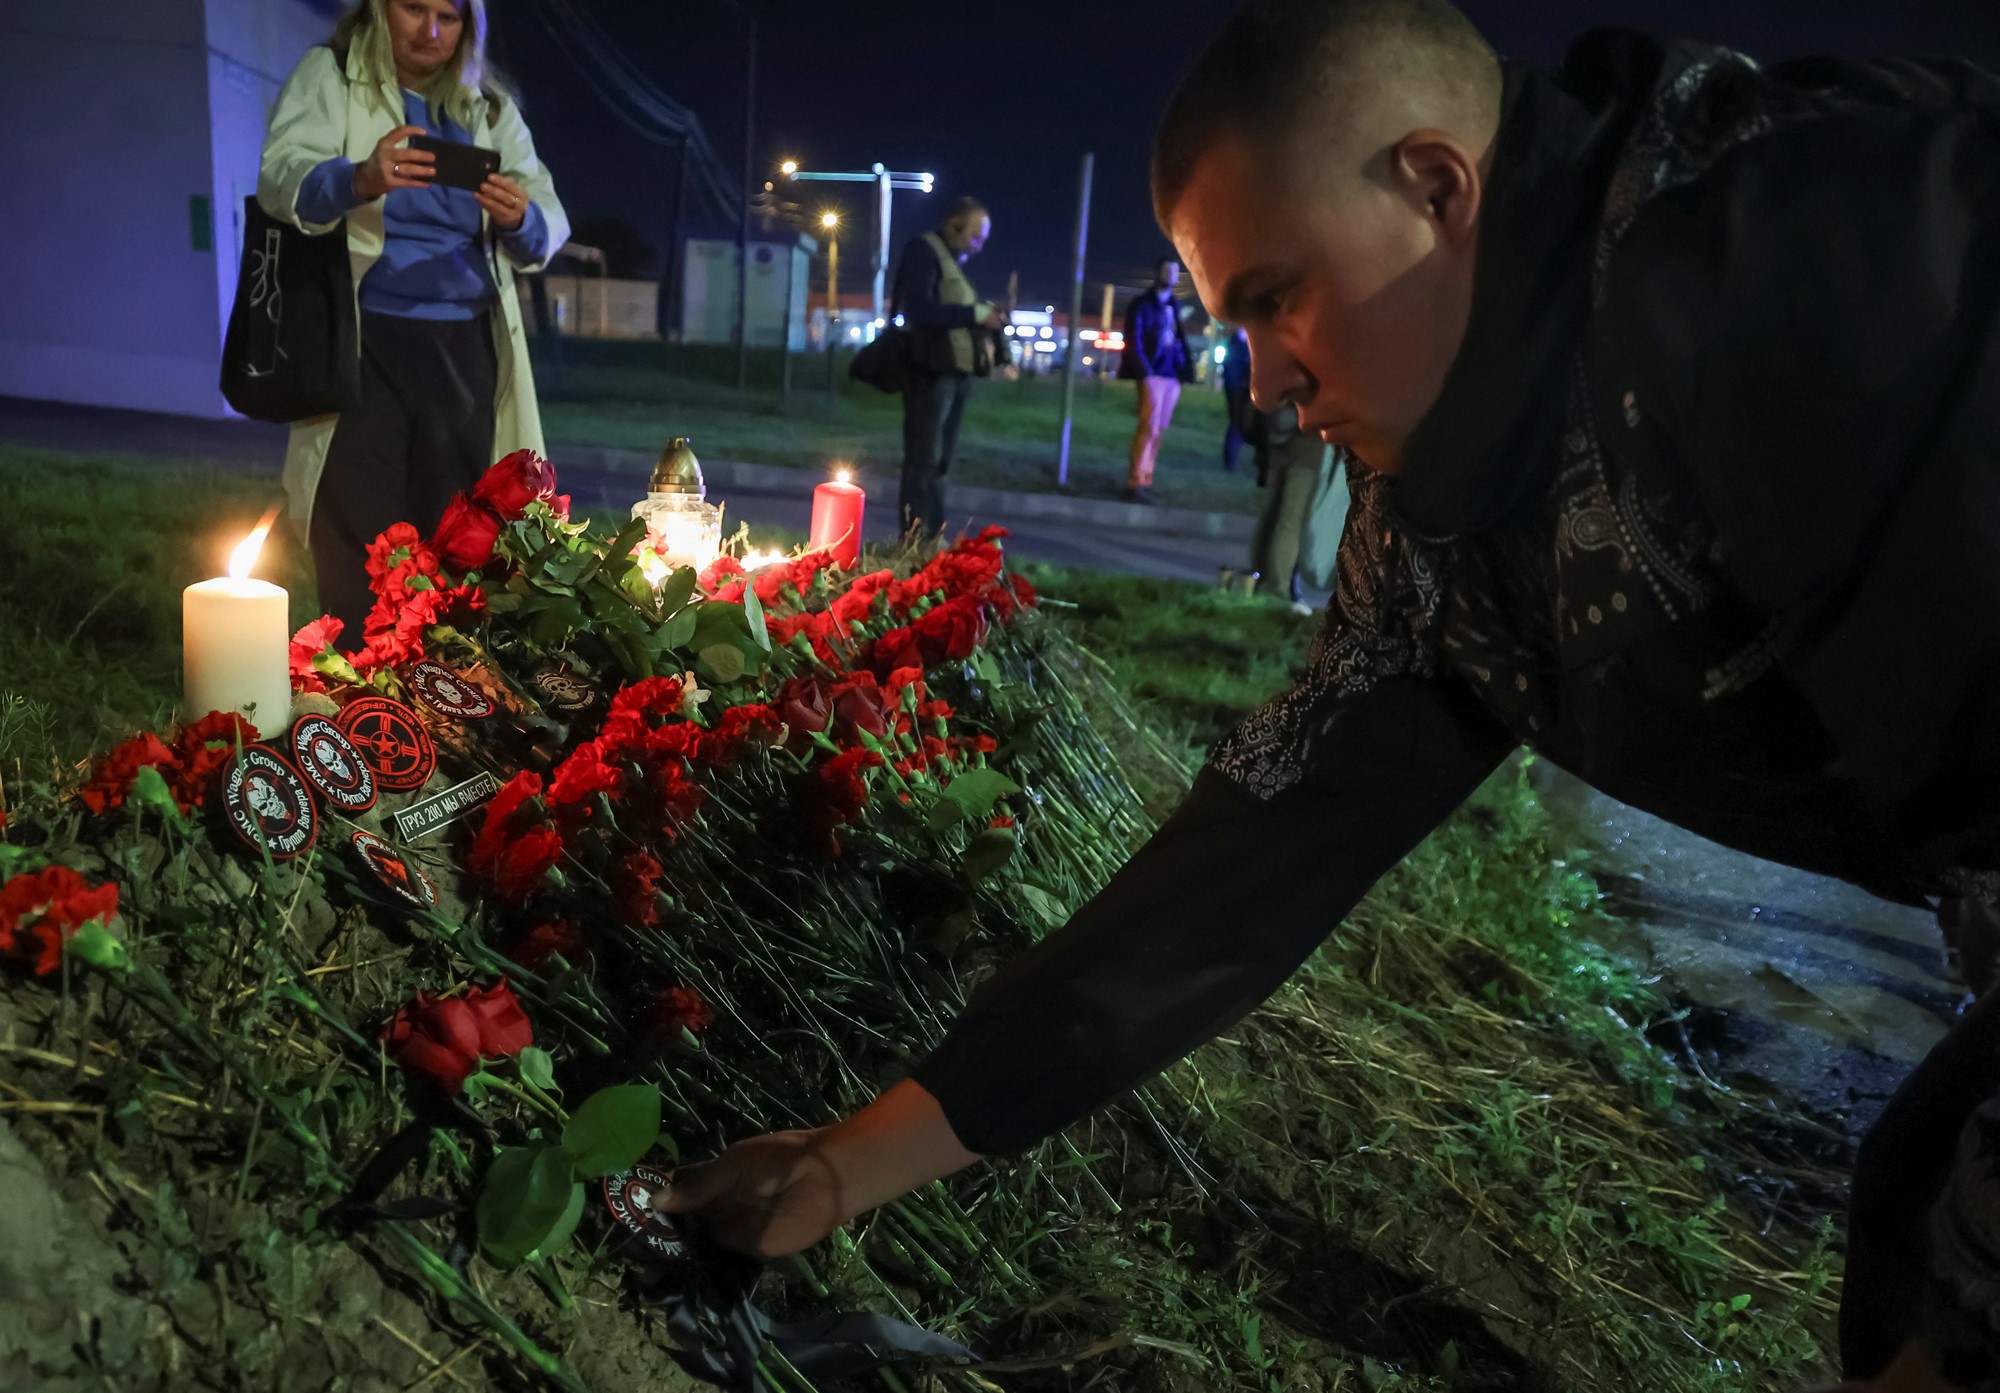 A man leans down to put a patch on a pile of roses, with candles, as a woman nearby takes a photo